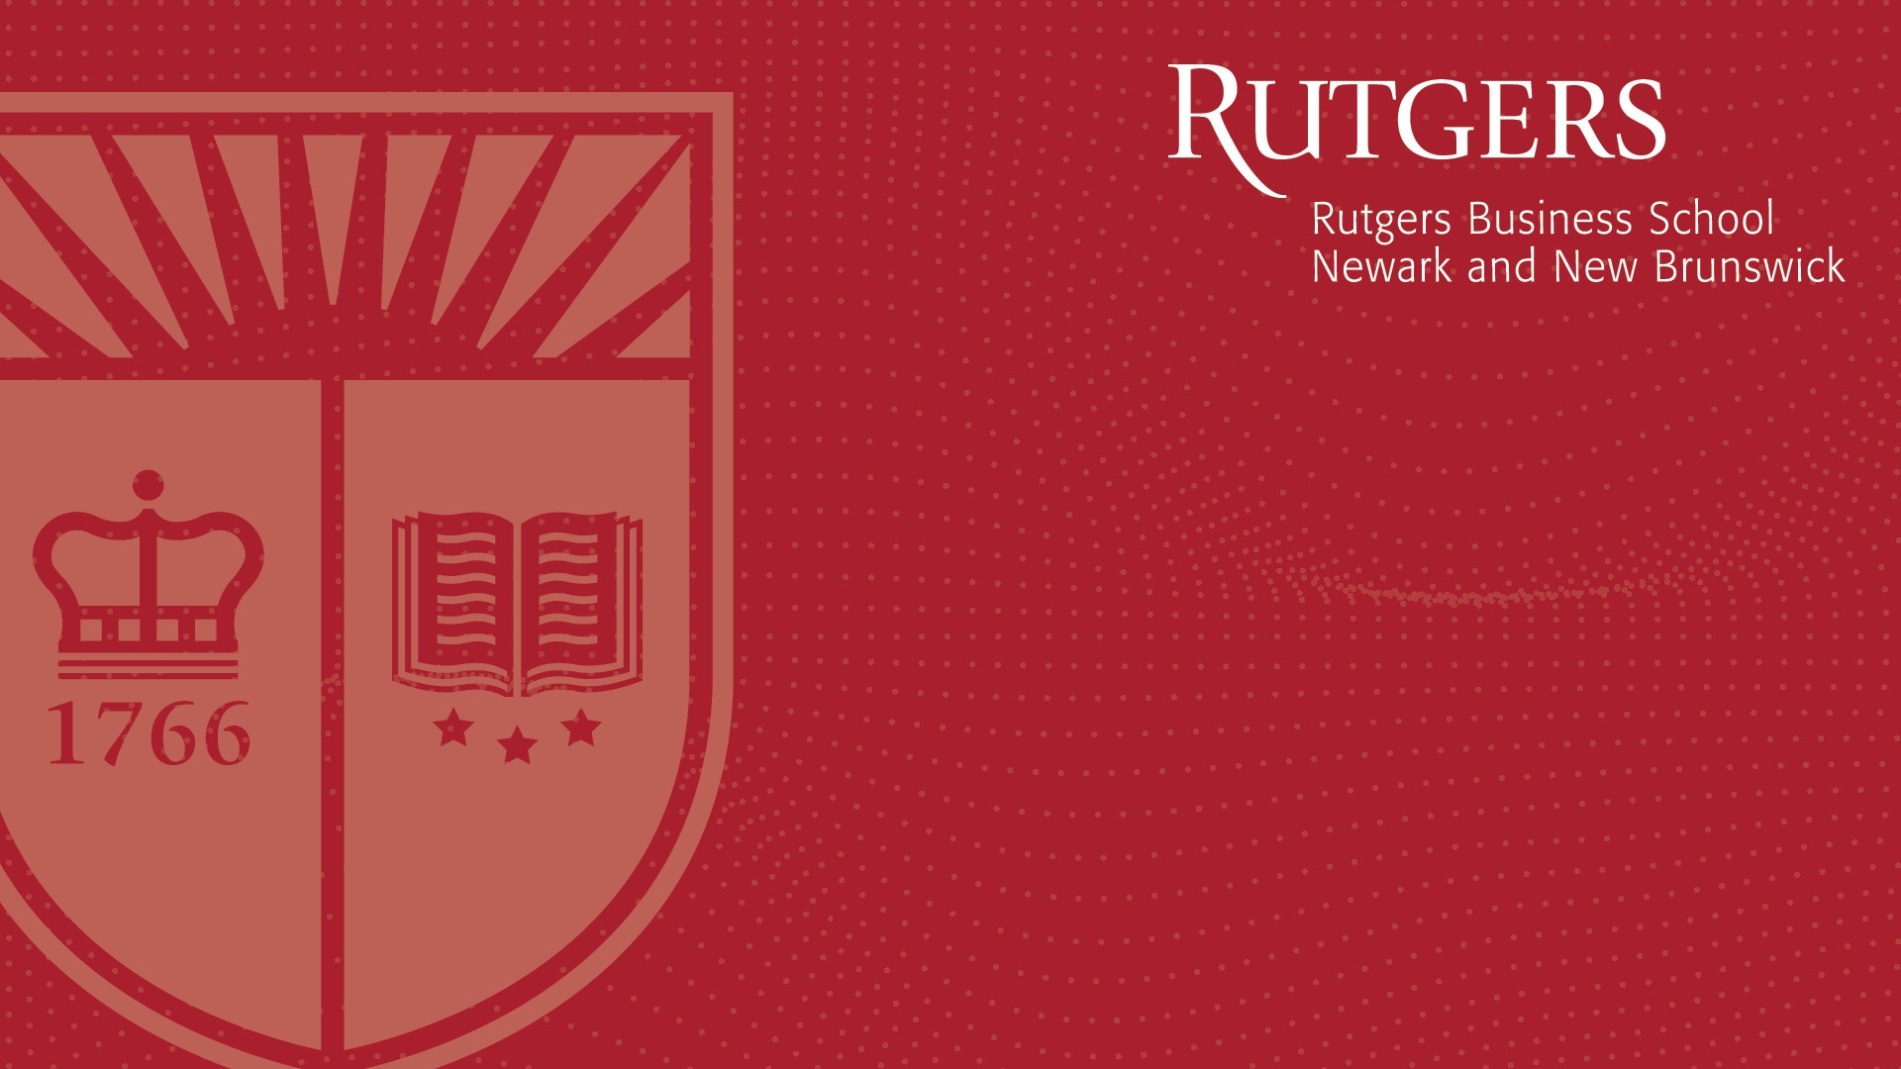 Rbs Marketing Resources And Services | Myrbs Regarding Rutgers Powerpoint Template